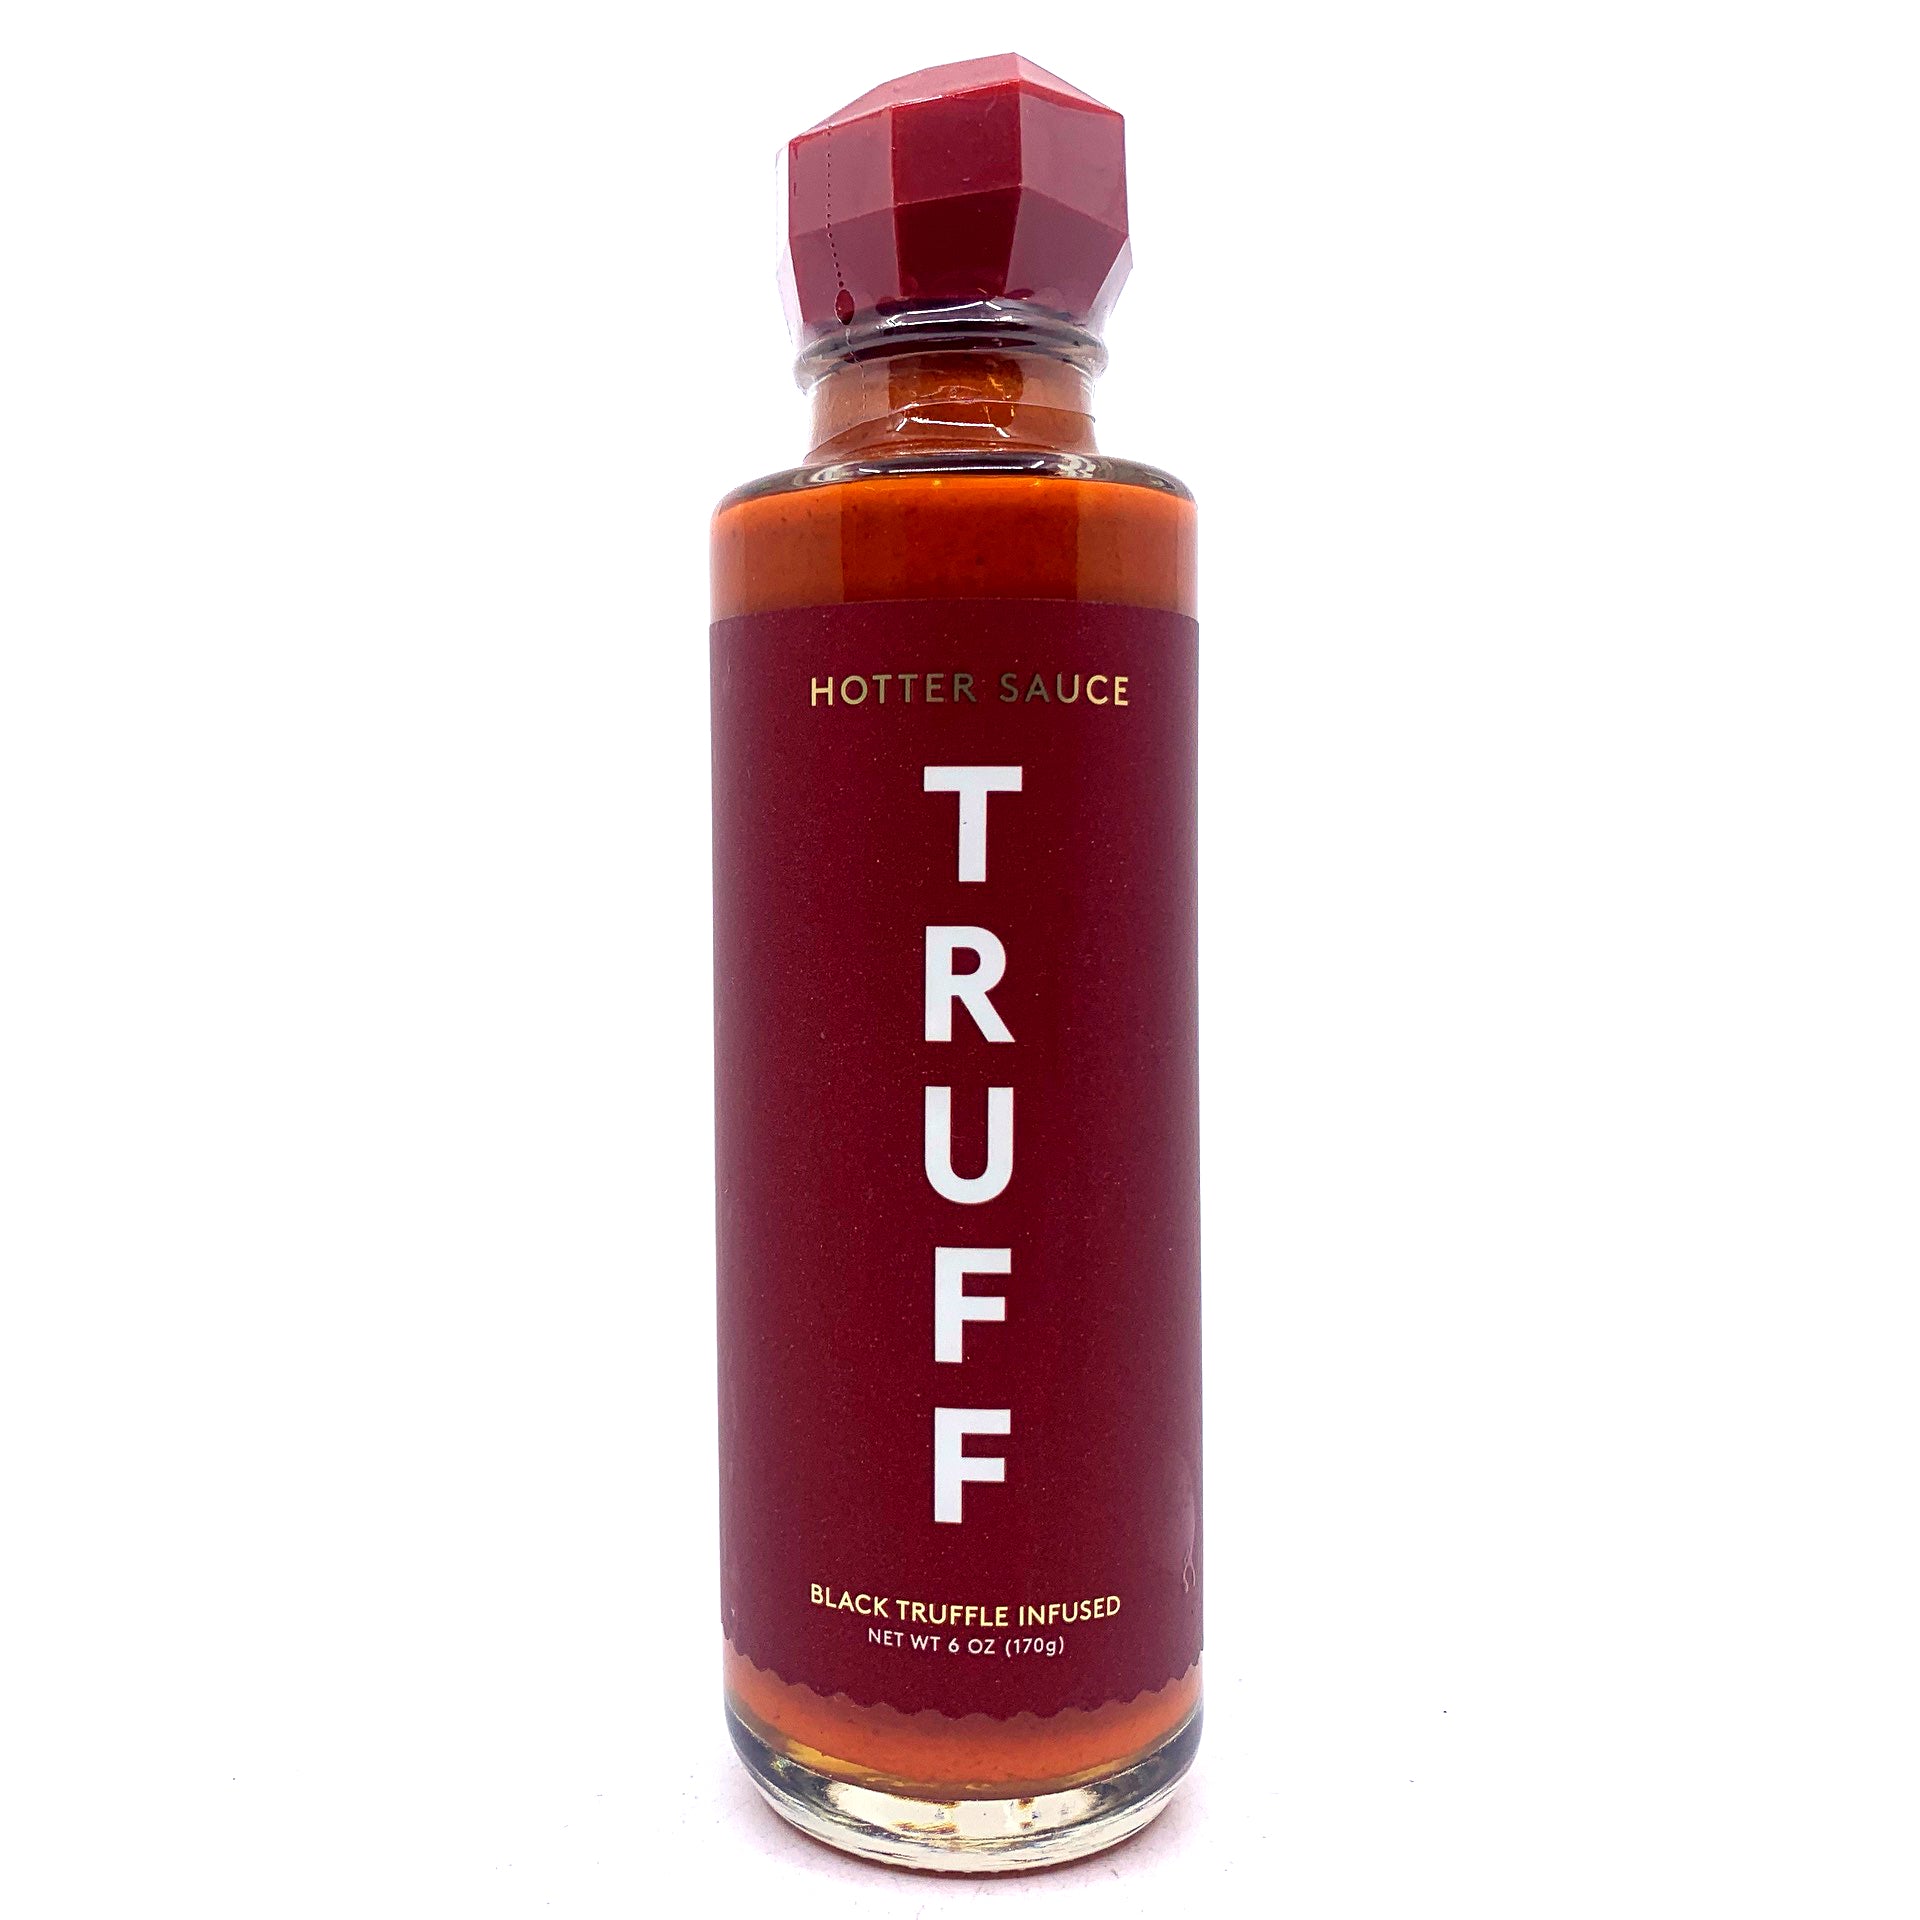 Truff Red Truffle Infused Hotter Sauce (170g)-Hop Burns & Black